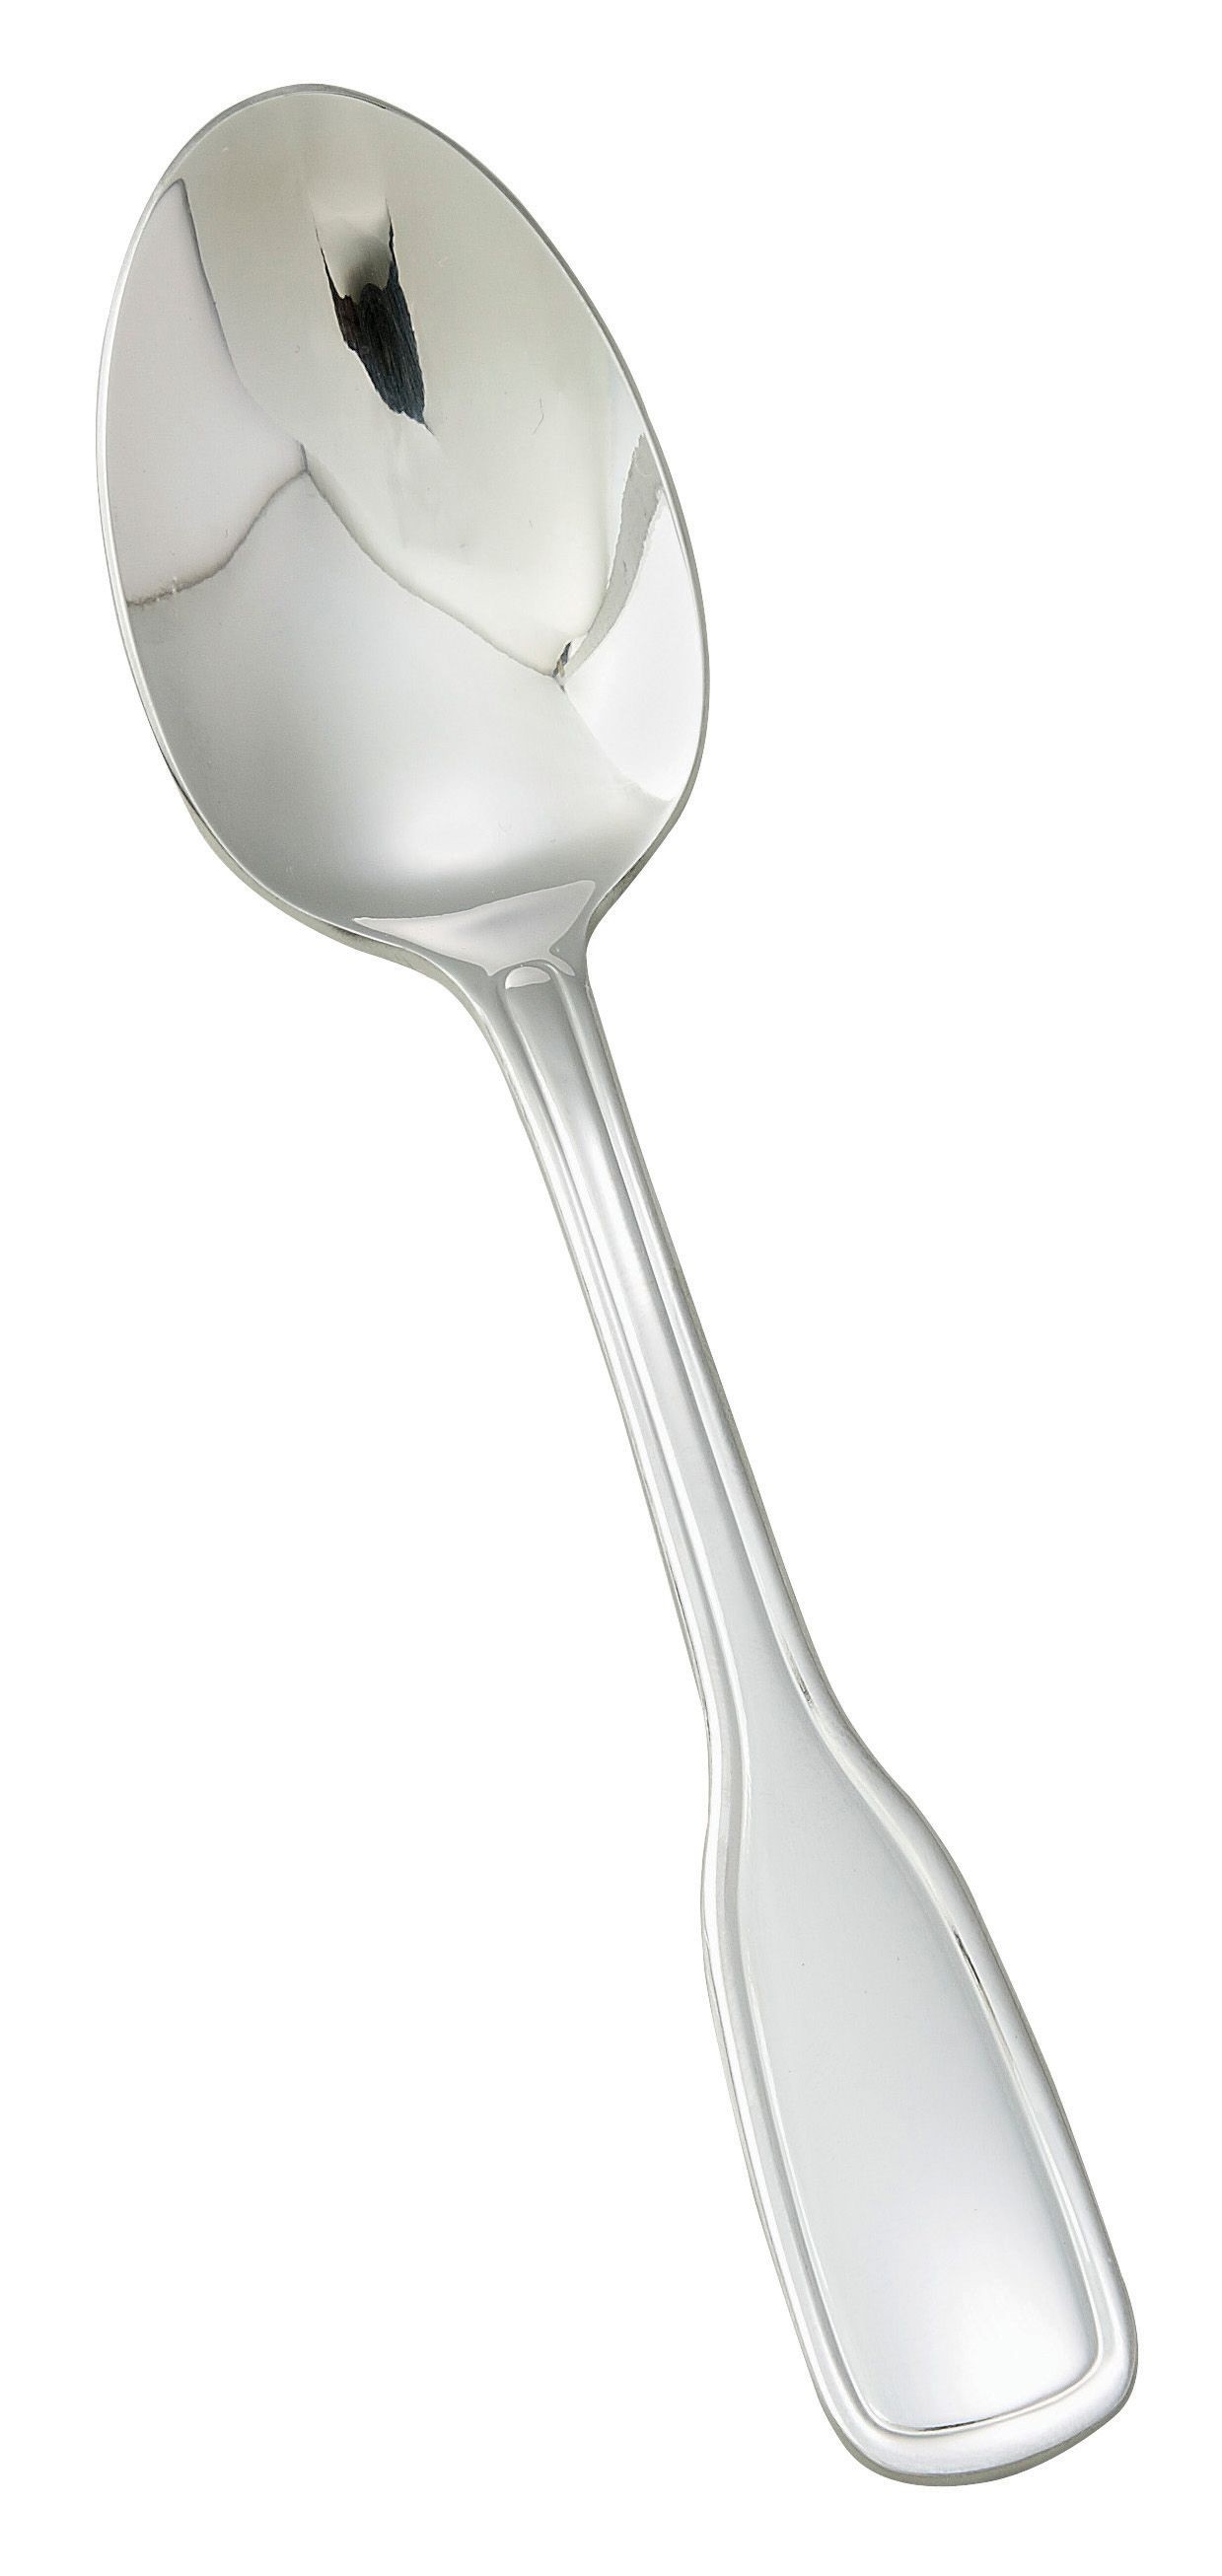 Winco 0033-03 Oxford Extra Heavy Stainless Steel Dinner Spoon (12/Pack)